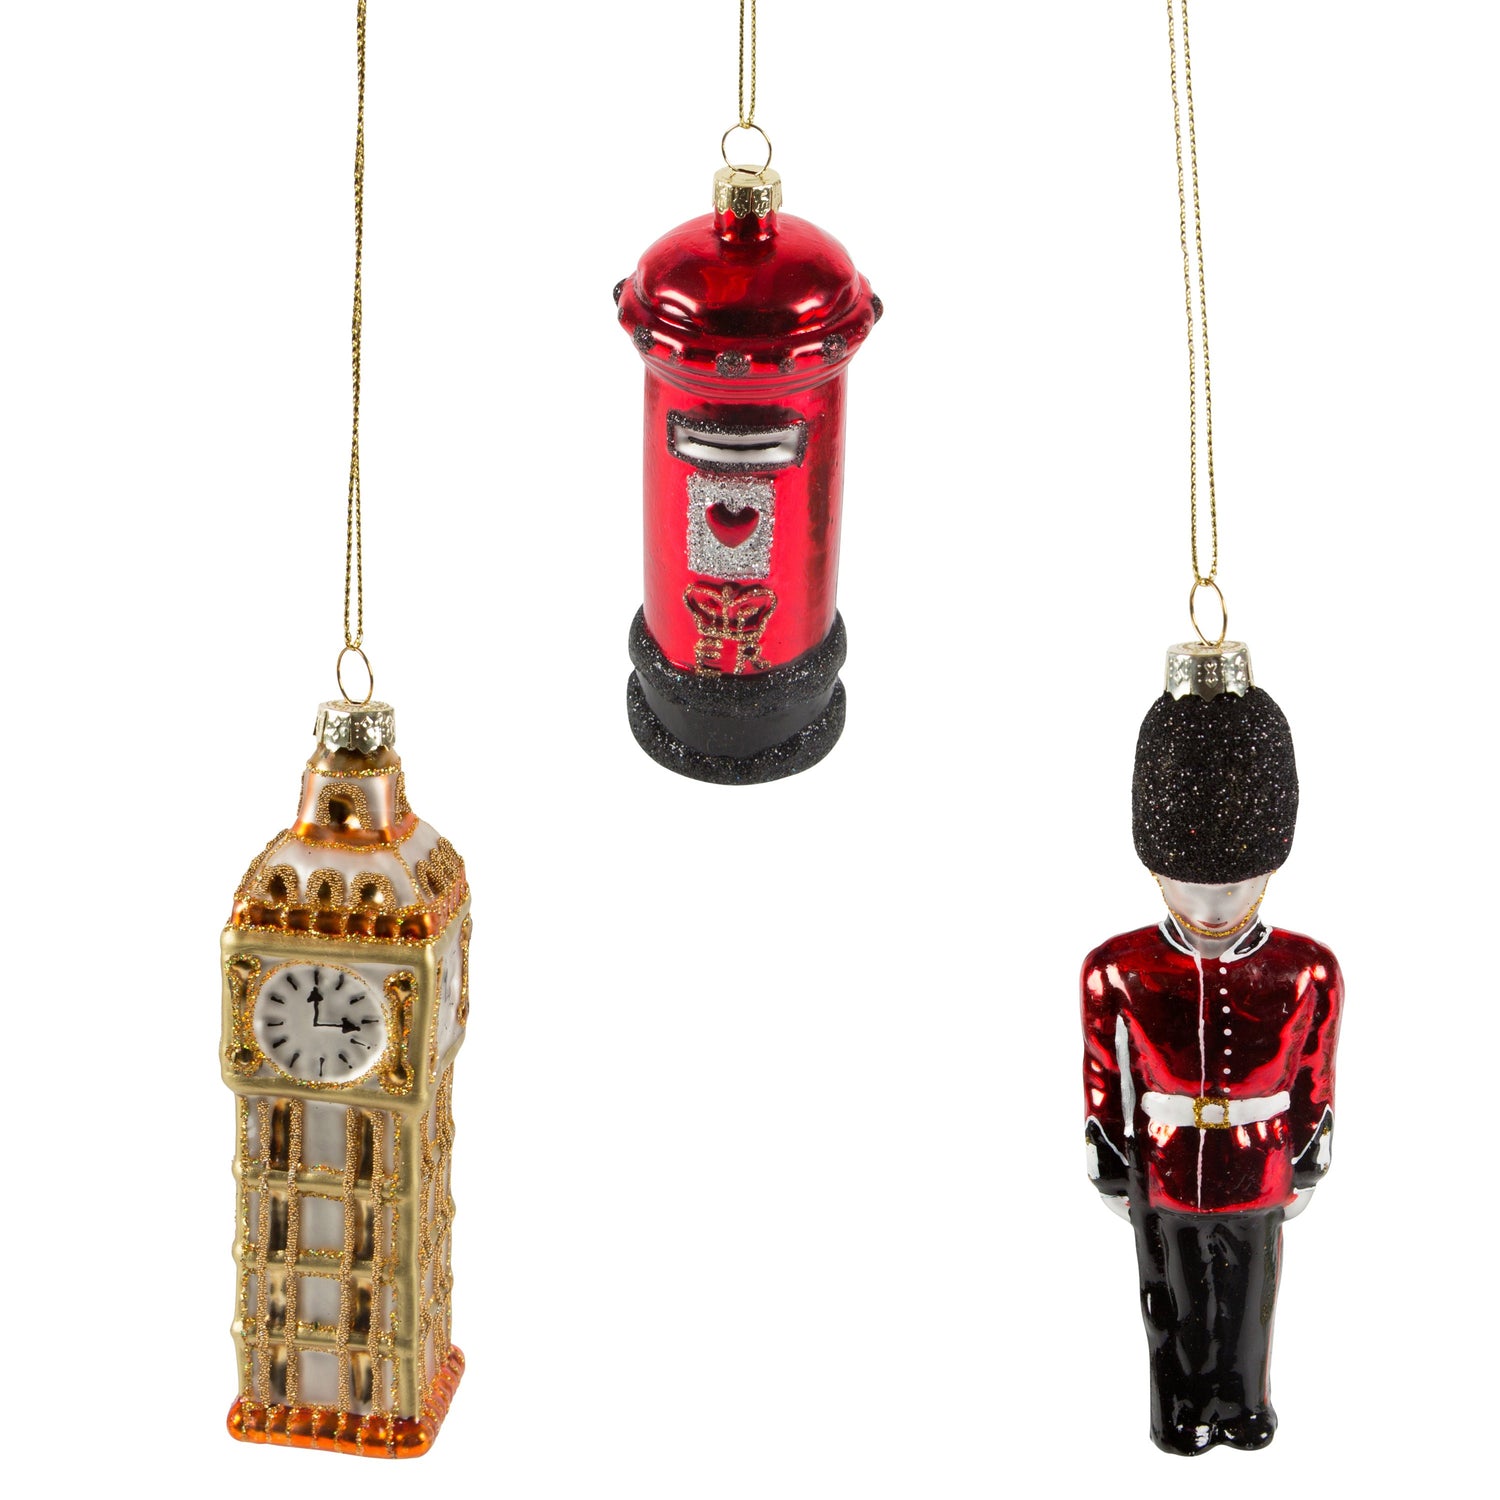 Create a traditional theme this festive season with these iconic London themed Christmas tree decorations. Featuring Big Ben, a red London post box, and a member of the Queen's Guard.